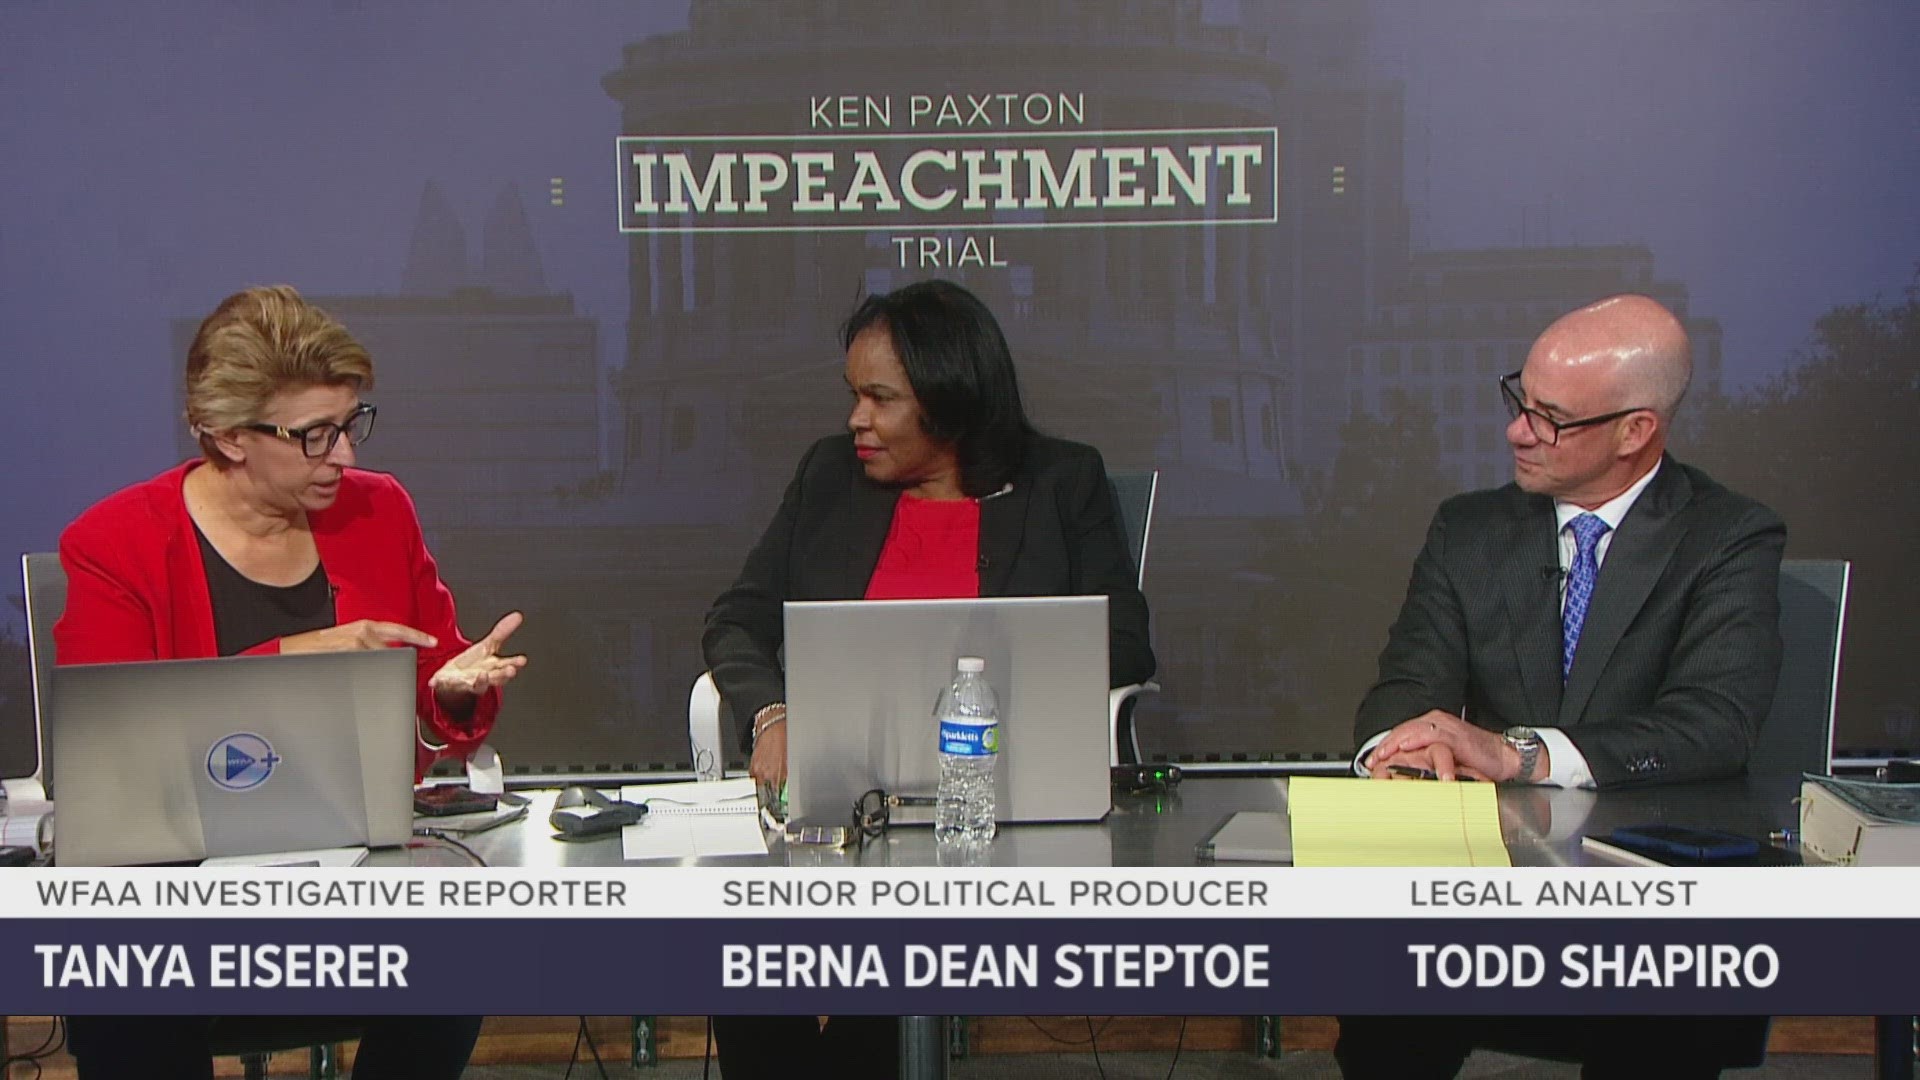 WFAA's Tanya Eiserer and guests Berna Dean Steptoe and Todd Shapiro break down testimony from Monday in the Ken Paxton impeachment trial.